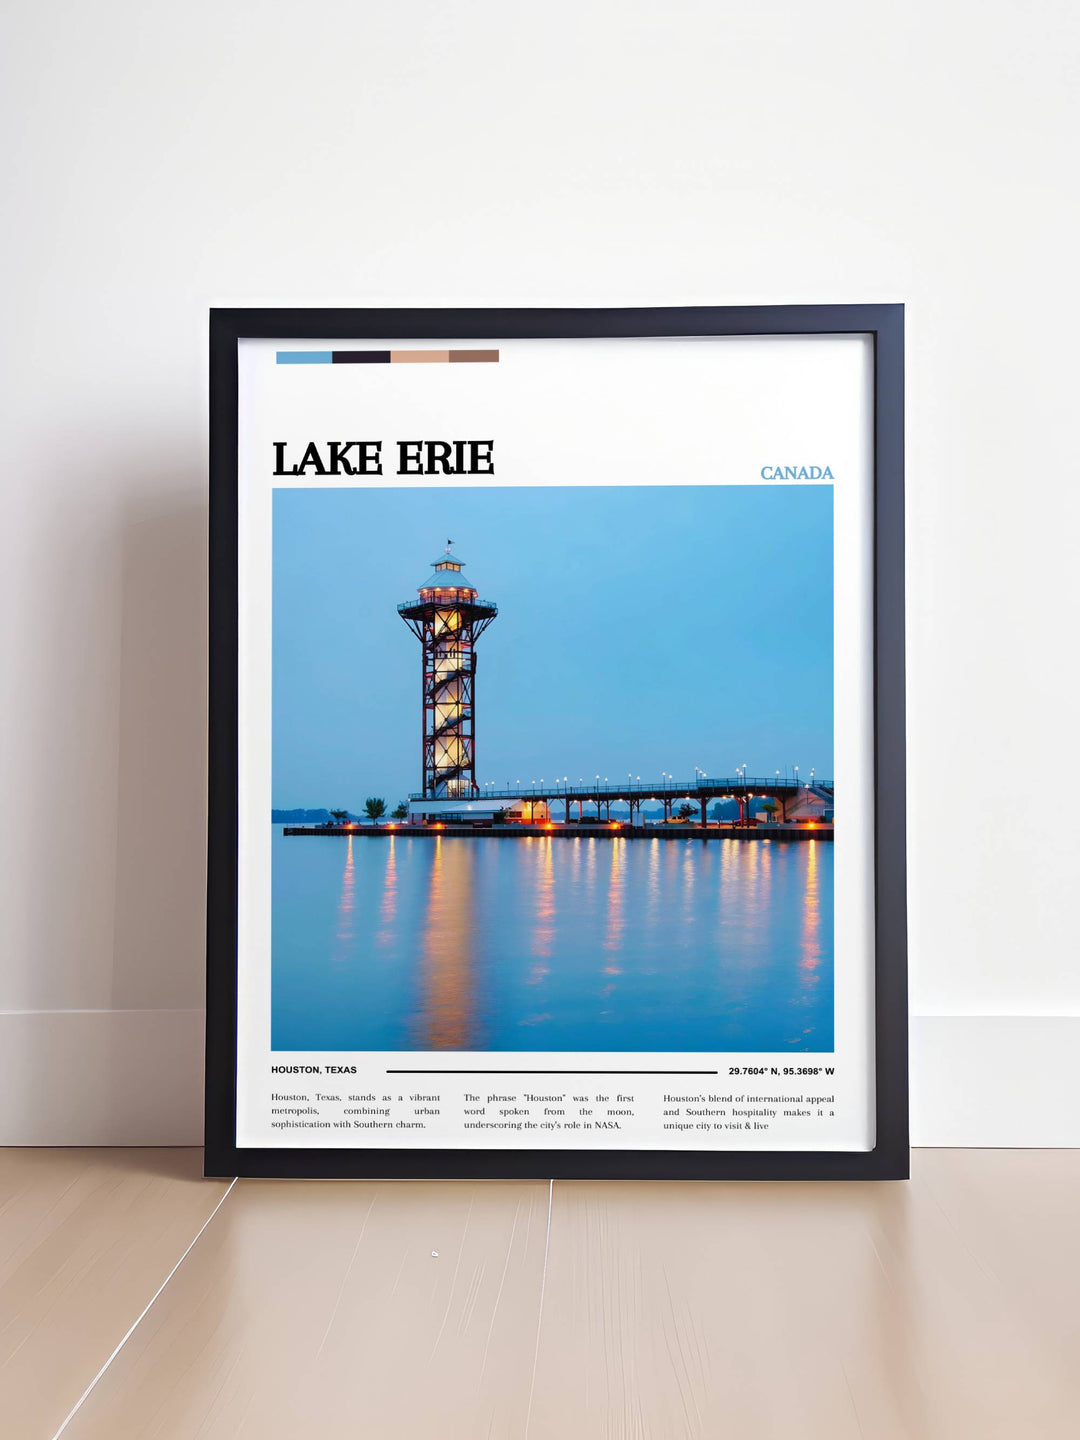 Unique Lake Erie travel poster highlighting major attractions and natural beauty, ideal for gift-giving